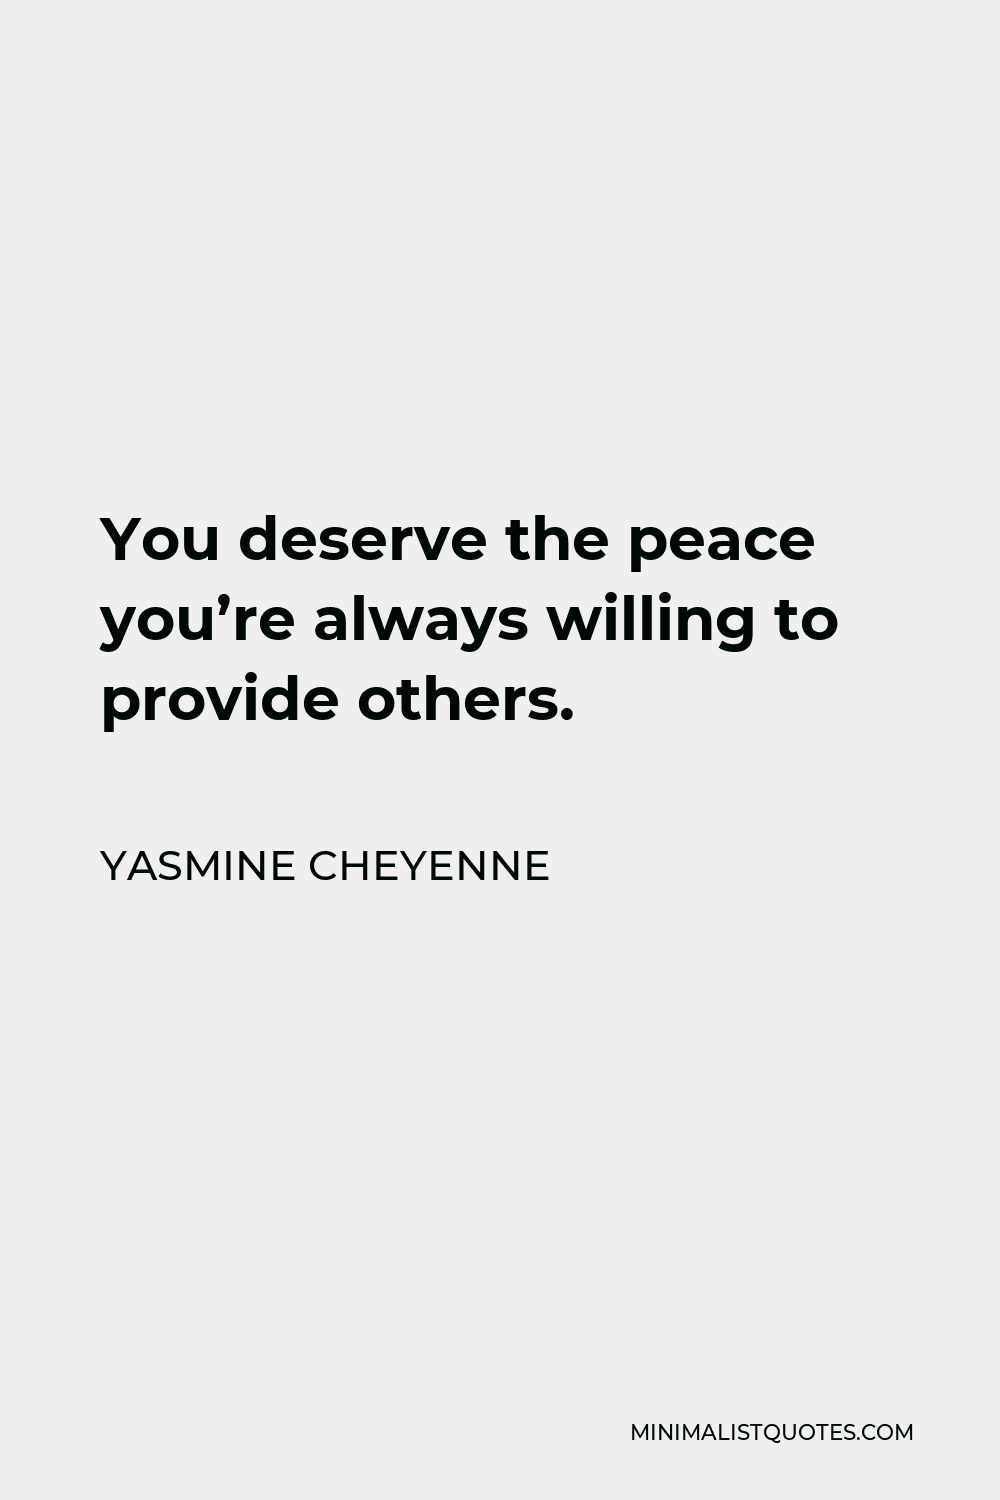 Yasmine Cheyenne Quote - You deserve the peace you’re always willing to provide others.